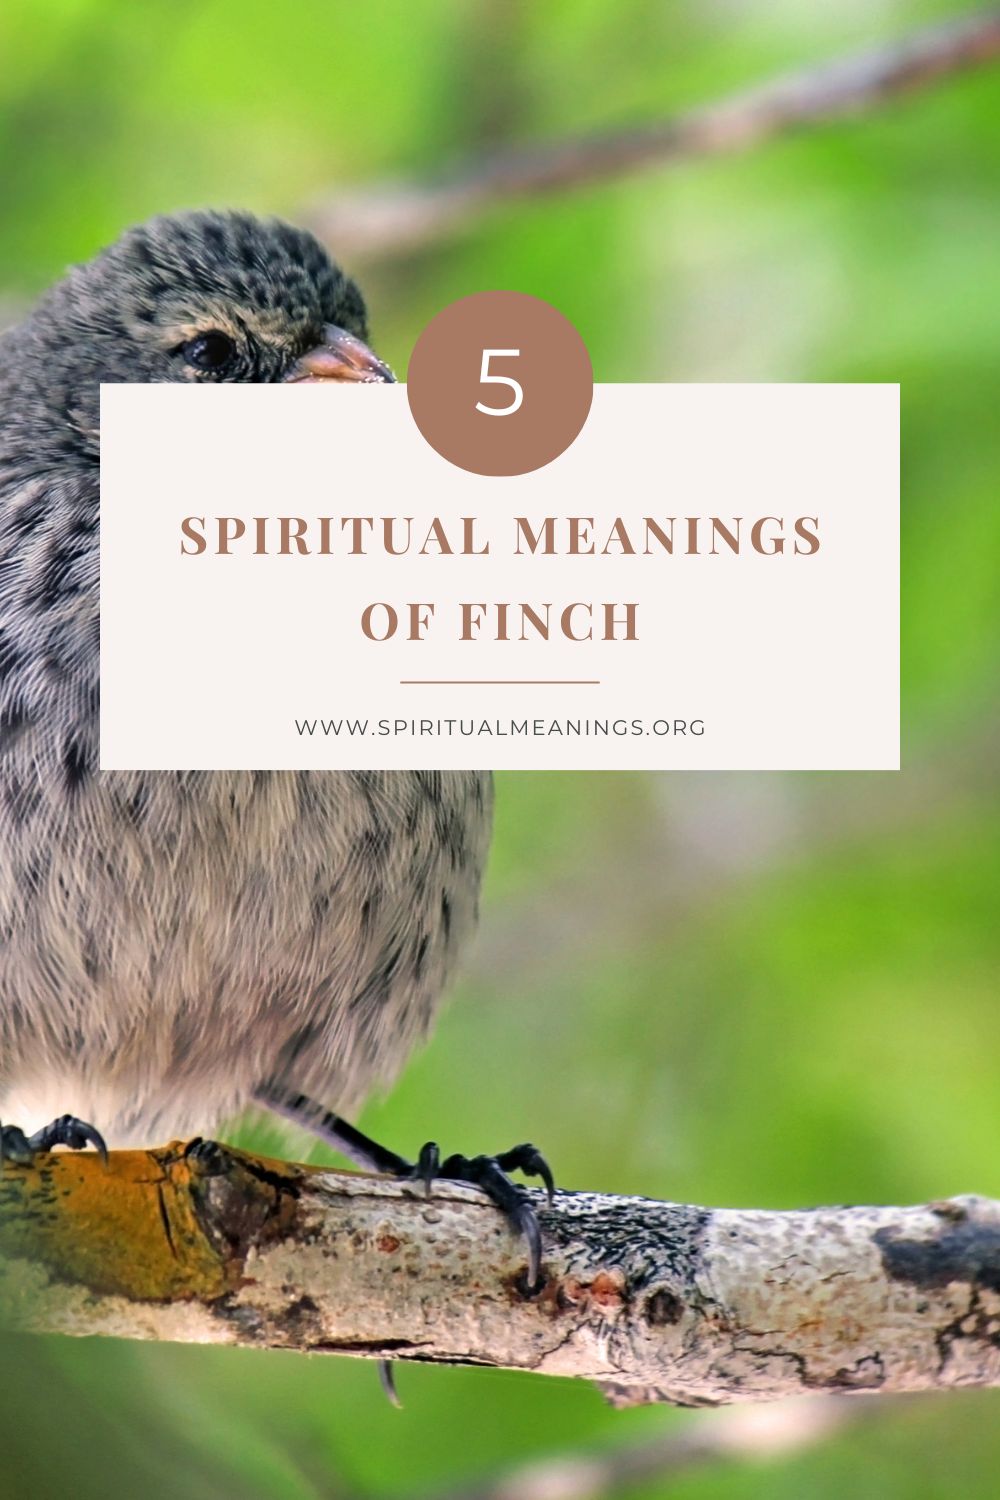 5 Spiritual Meanings of Finch